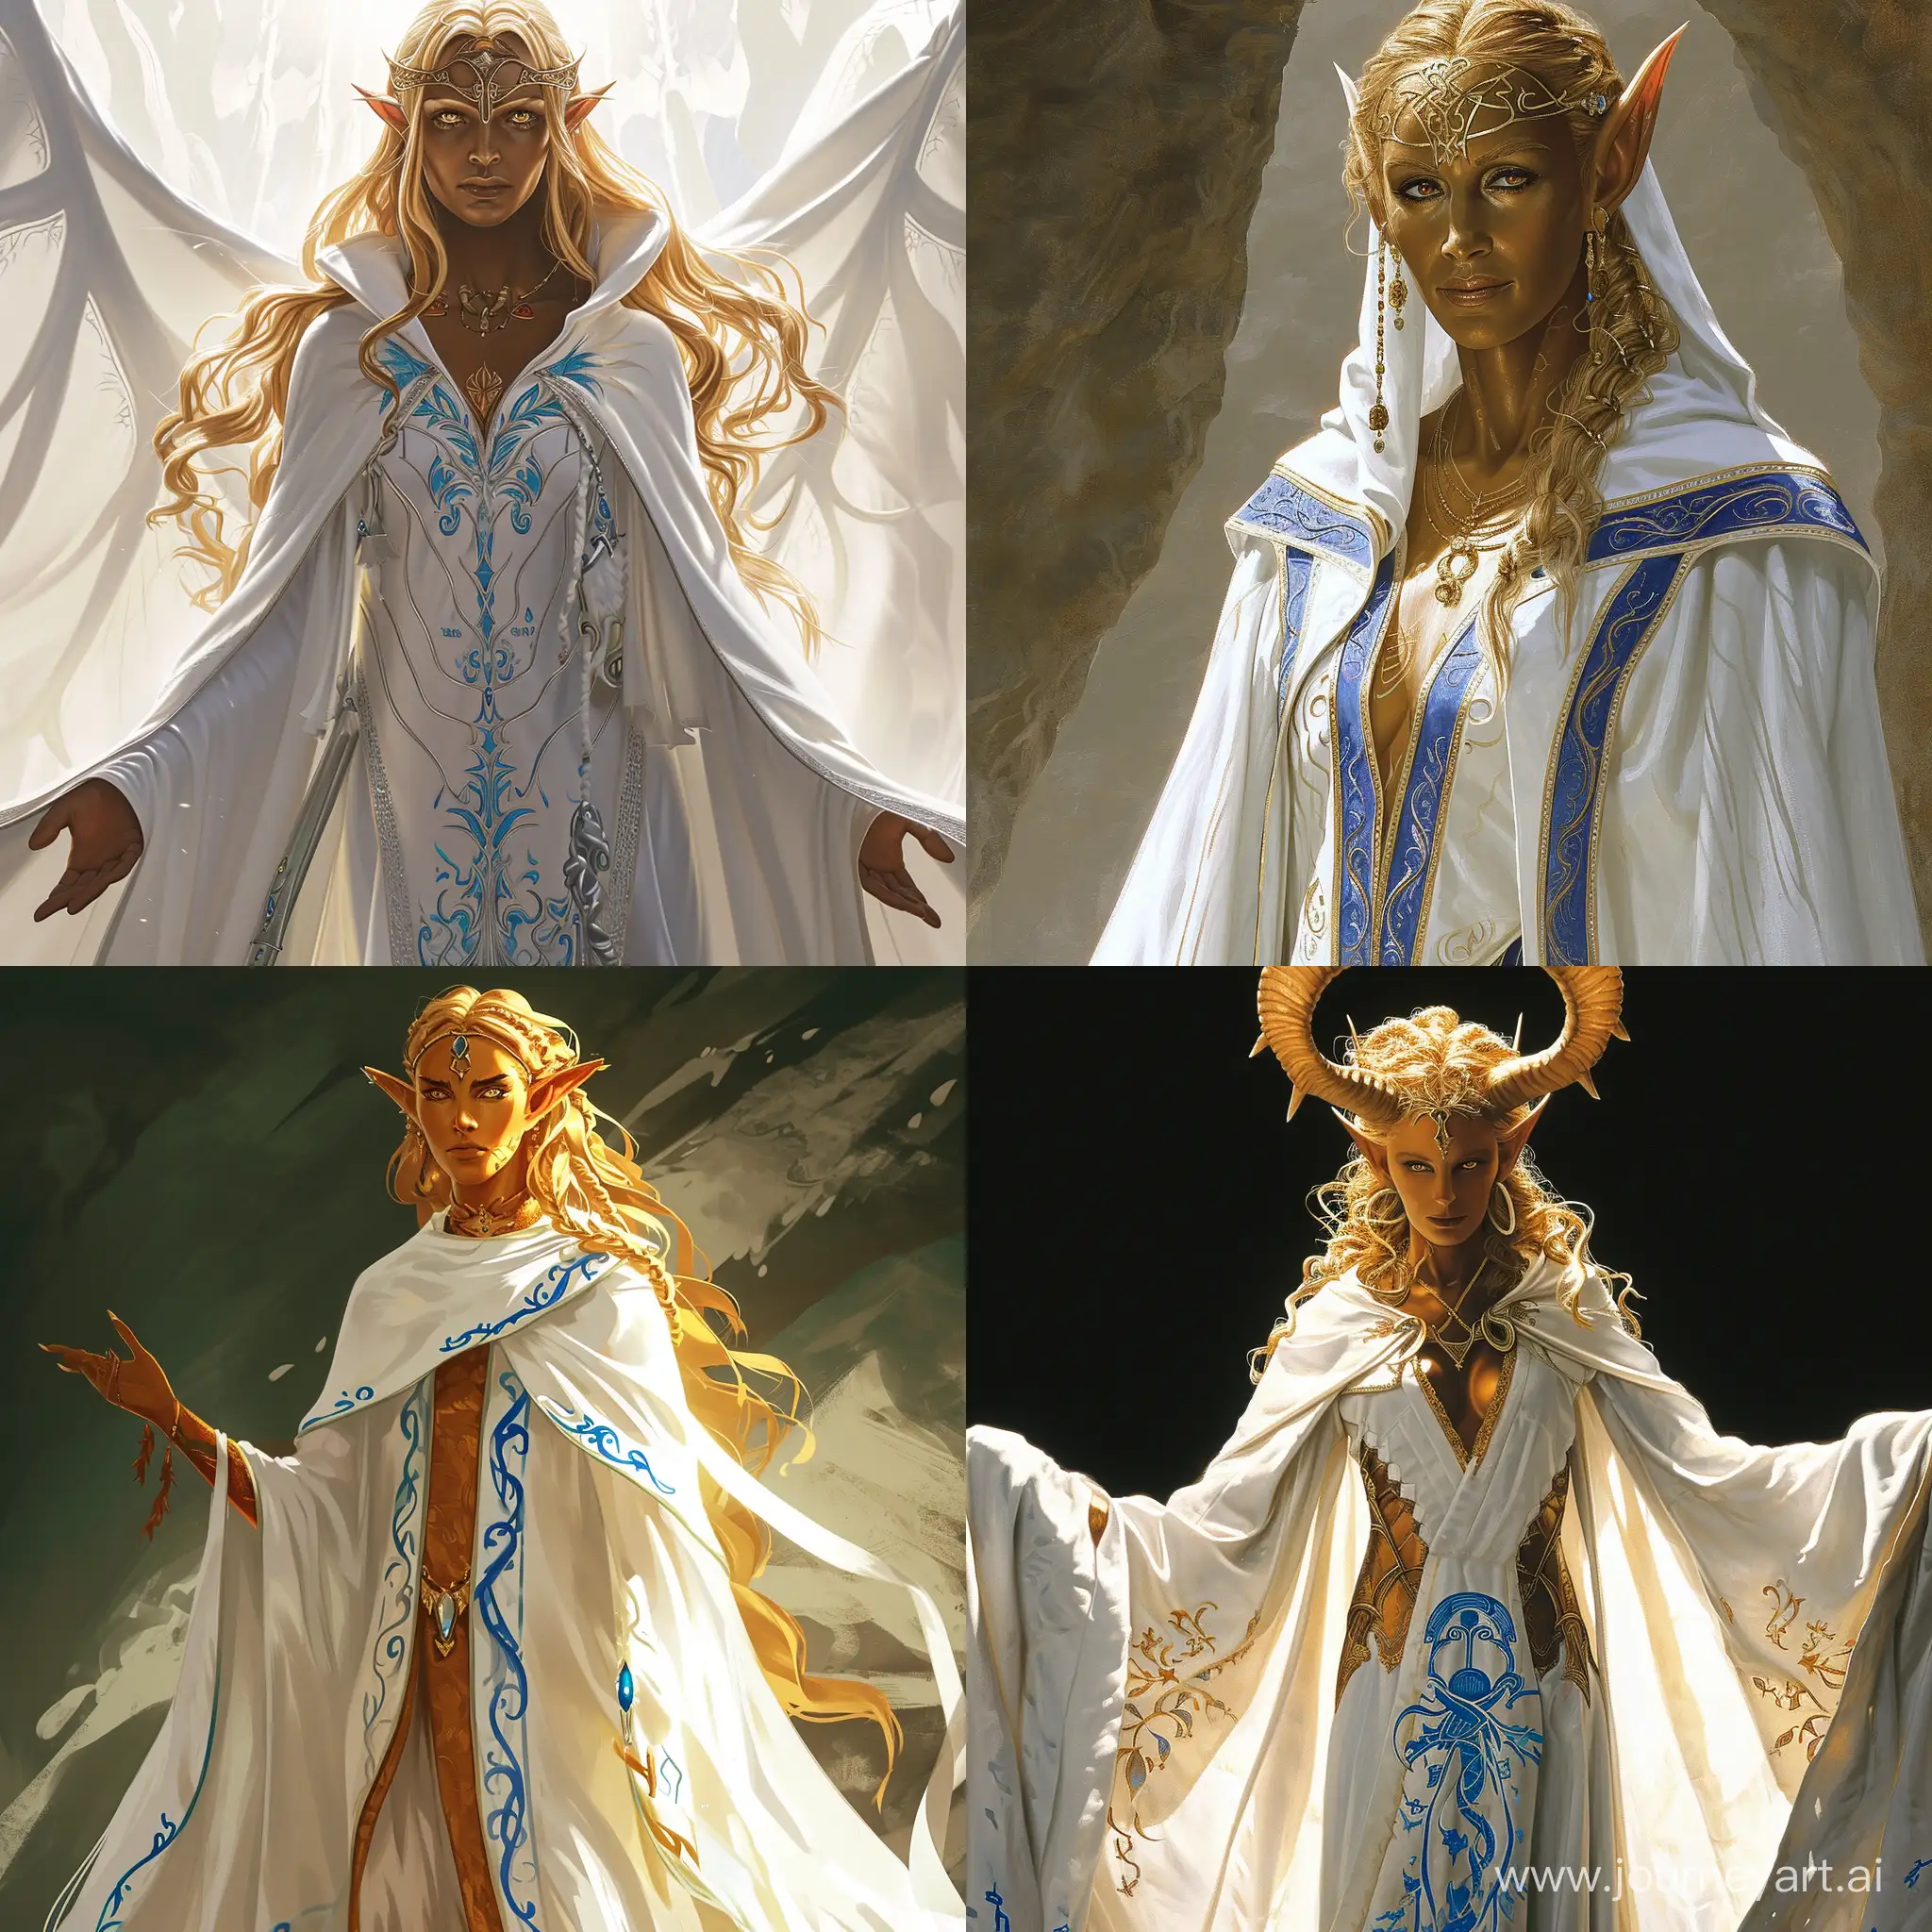 female high sun elf cleric with bronze skin golden eyes and golden blonde hair wearing flowing white robes embroidered with blue 